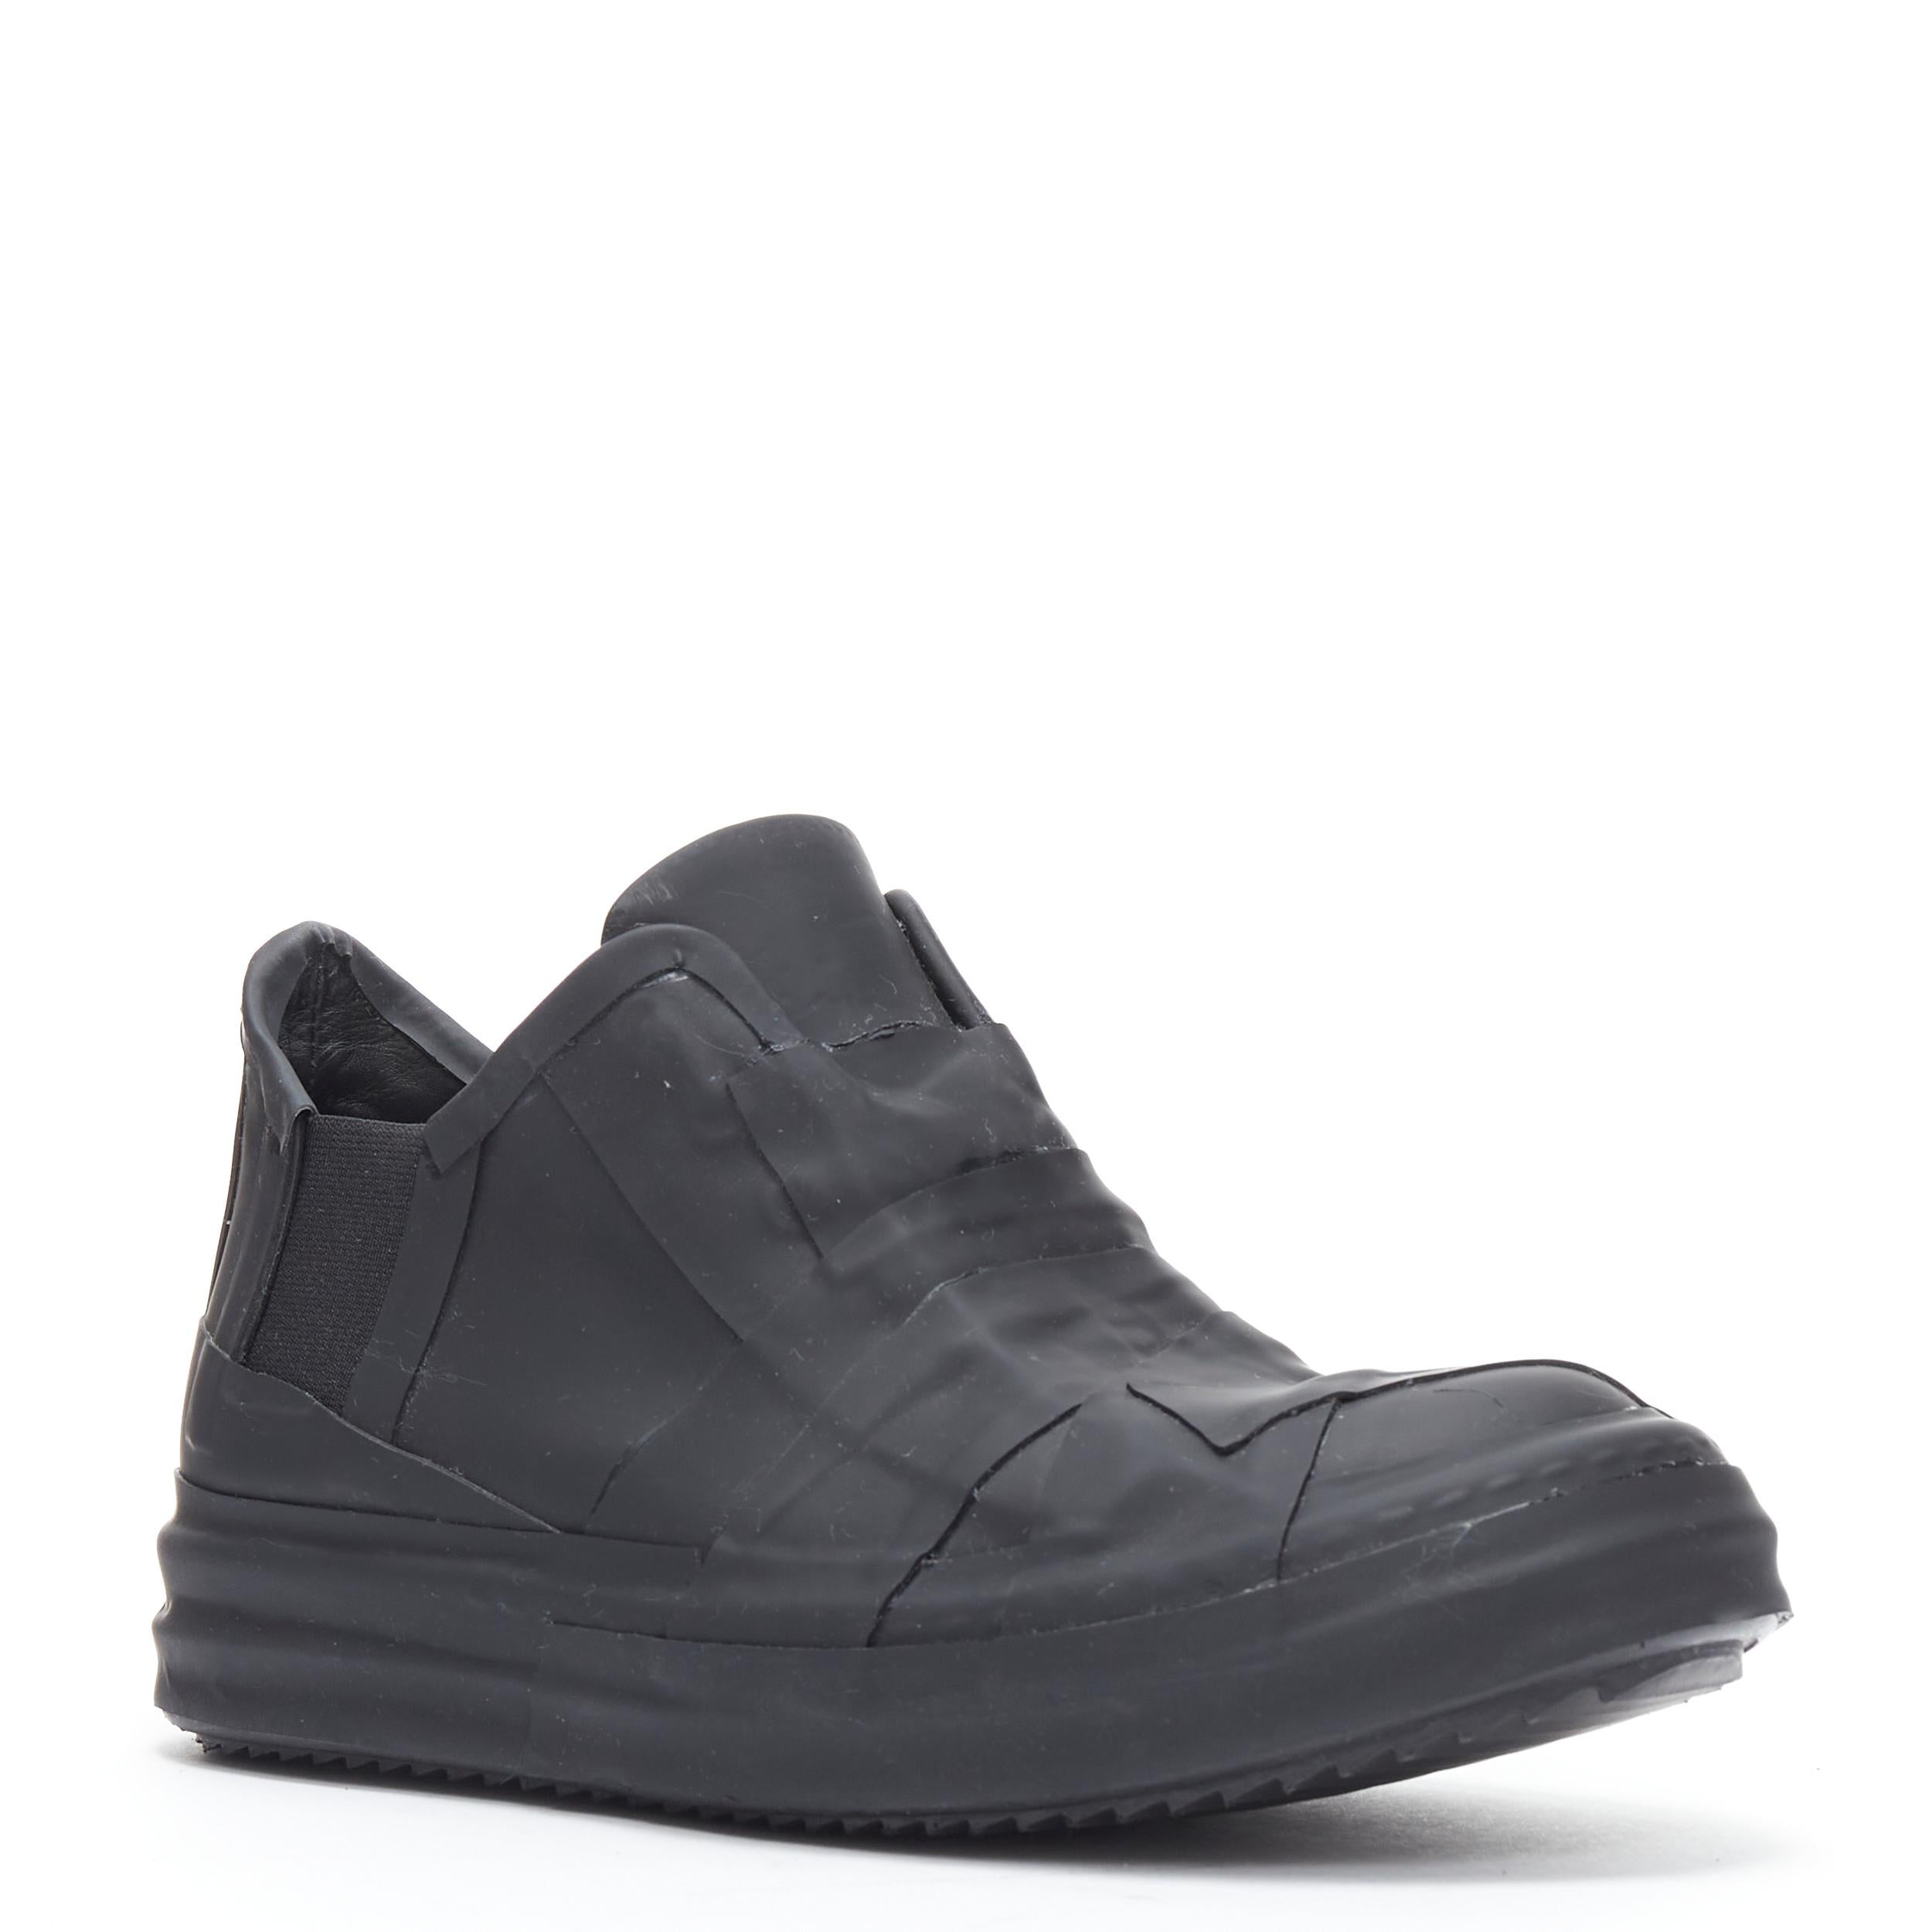 new RICK OWENS Geobasket Mummy Plaster wrapped black mid top sneaker EU37 
Reference: TGAS/B01327 
Brand: Rick Owens 
Designer: Rick Owens 
Model: Black plastered geobasket 
Material: Rubber 
Color: Black 
Pattern: Solid 
Closure: Stretch 
Extra